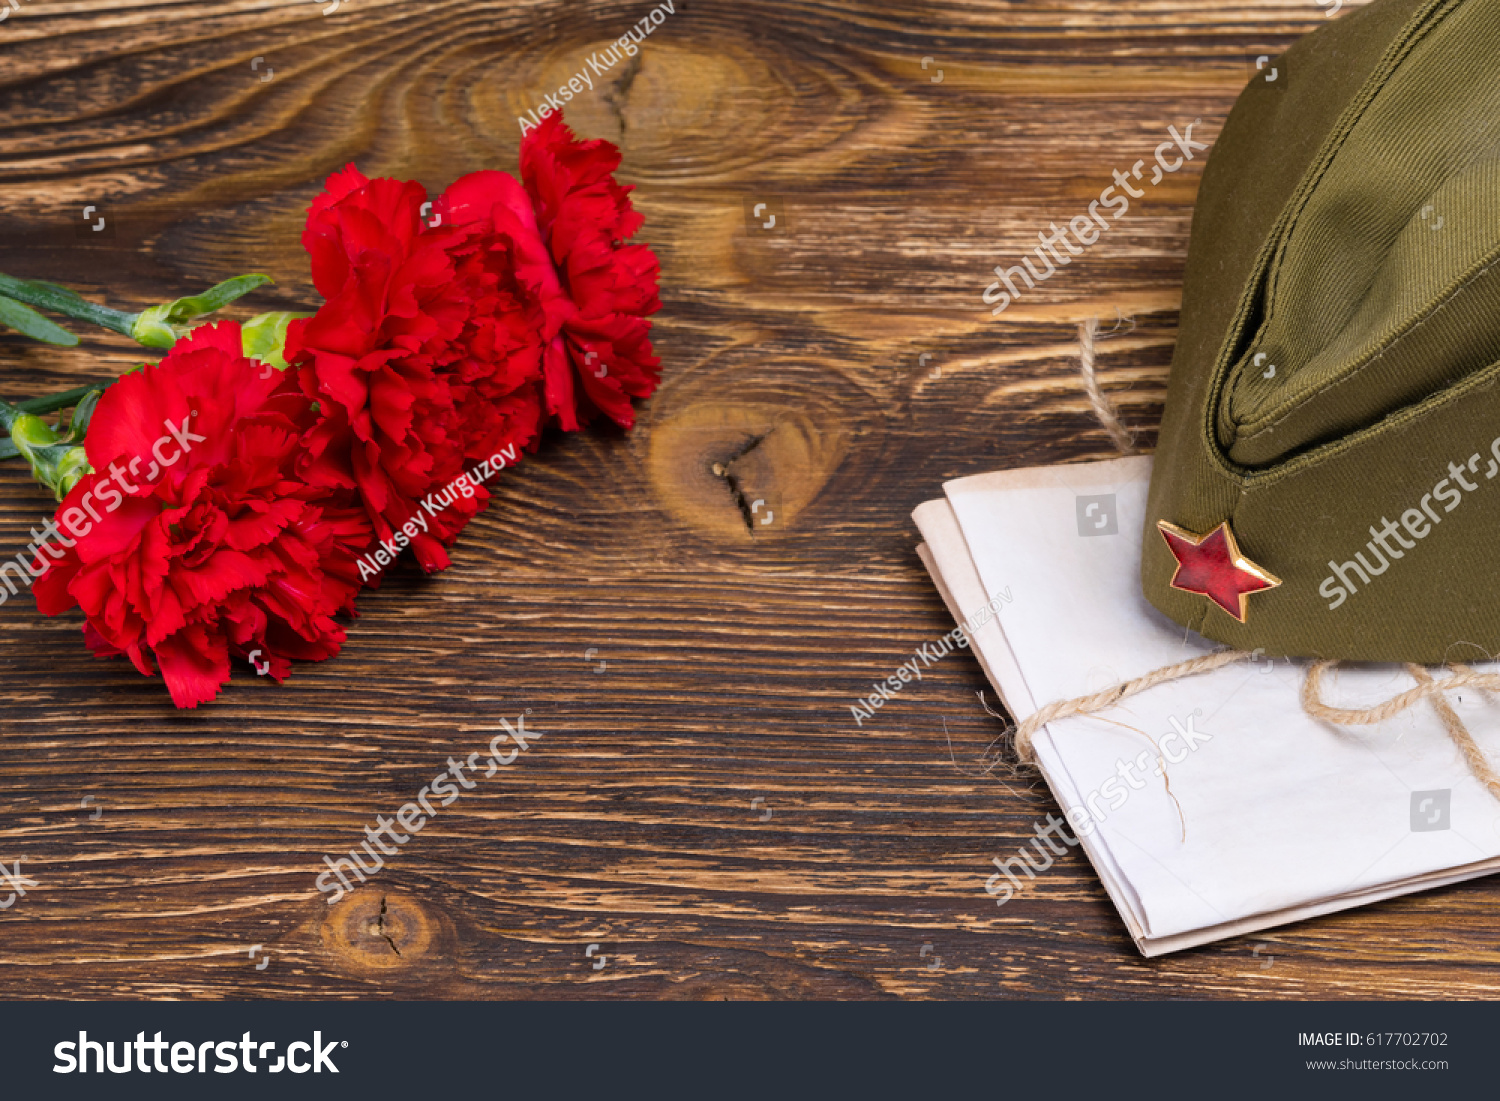 Military letters under the cap and three carnations in honor of May 9 #617702702